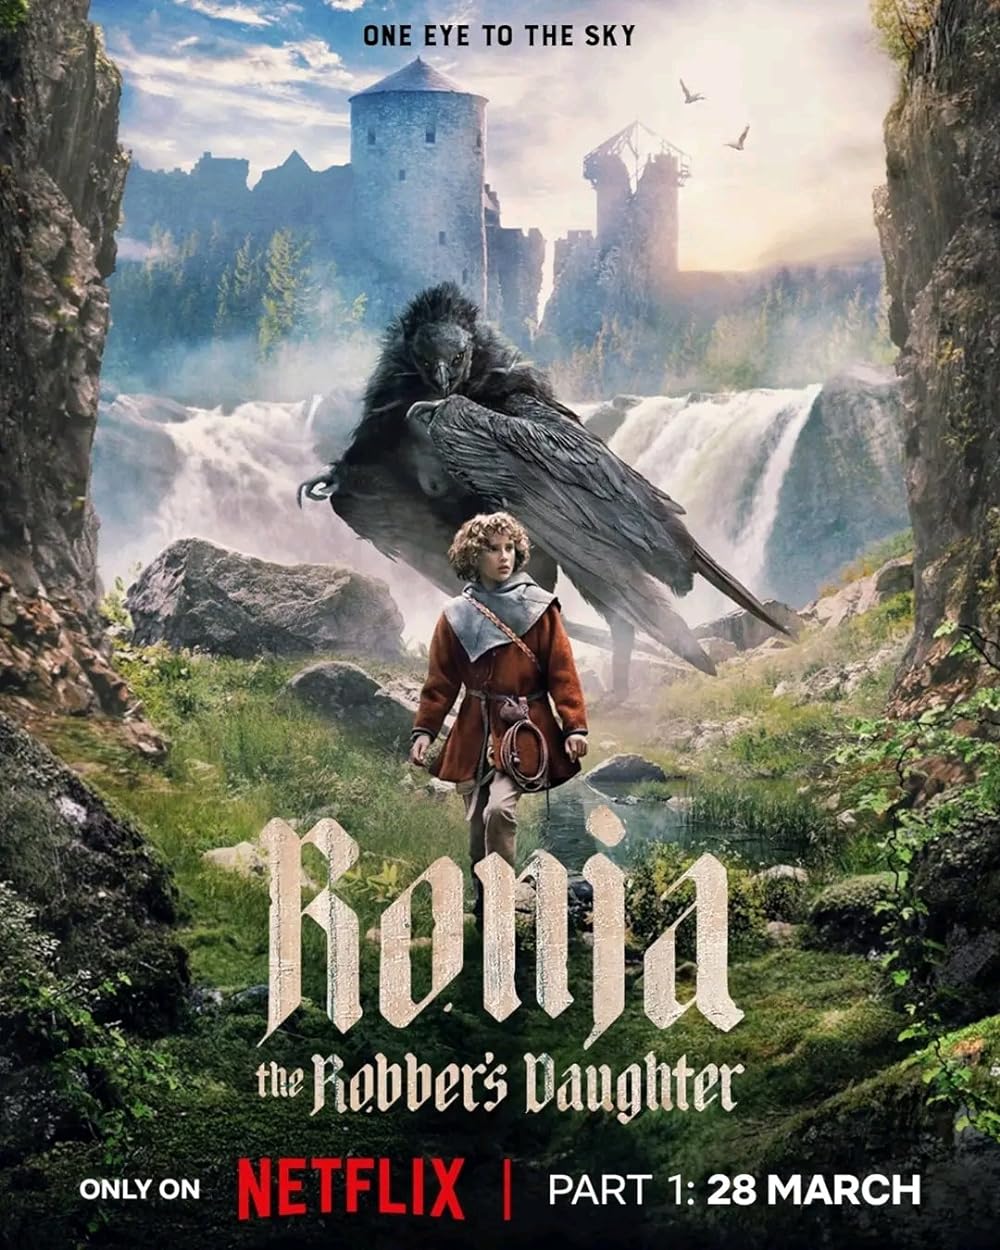 Ronja the Robber's Daughter (2024)